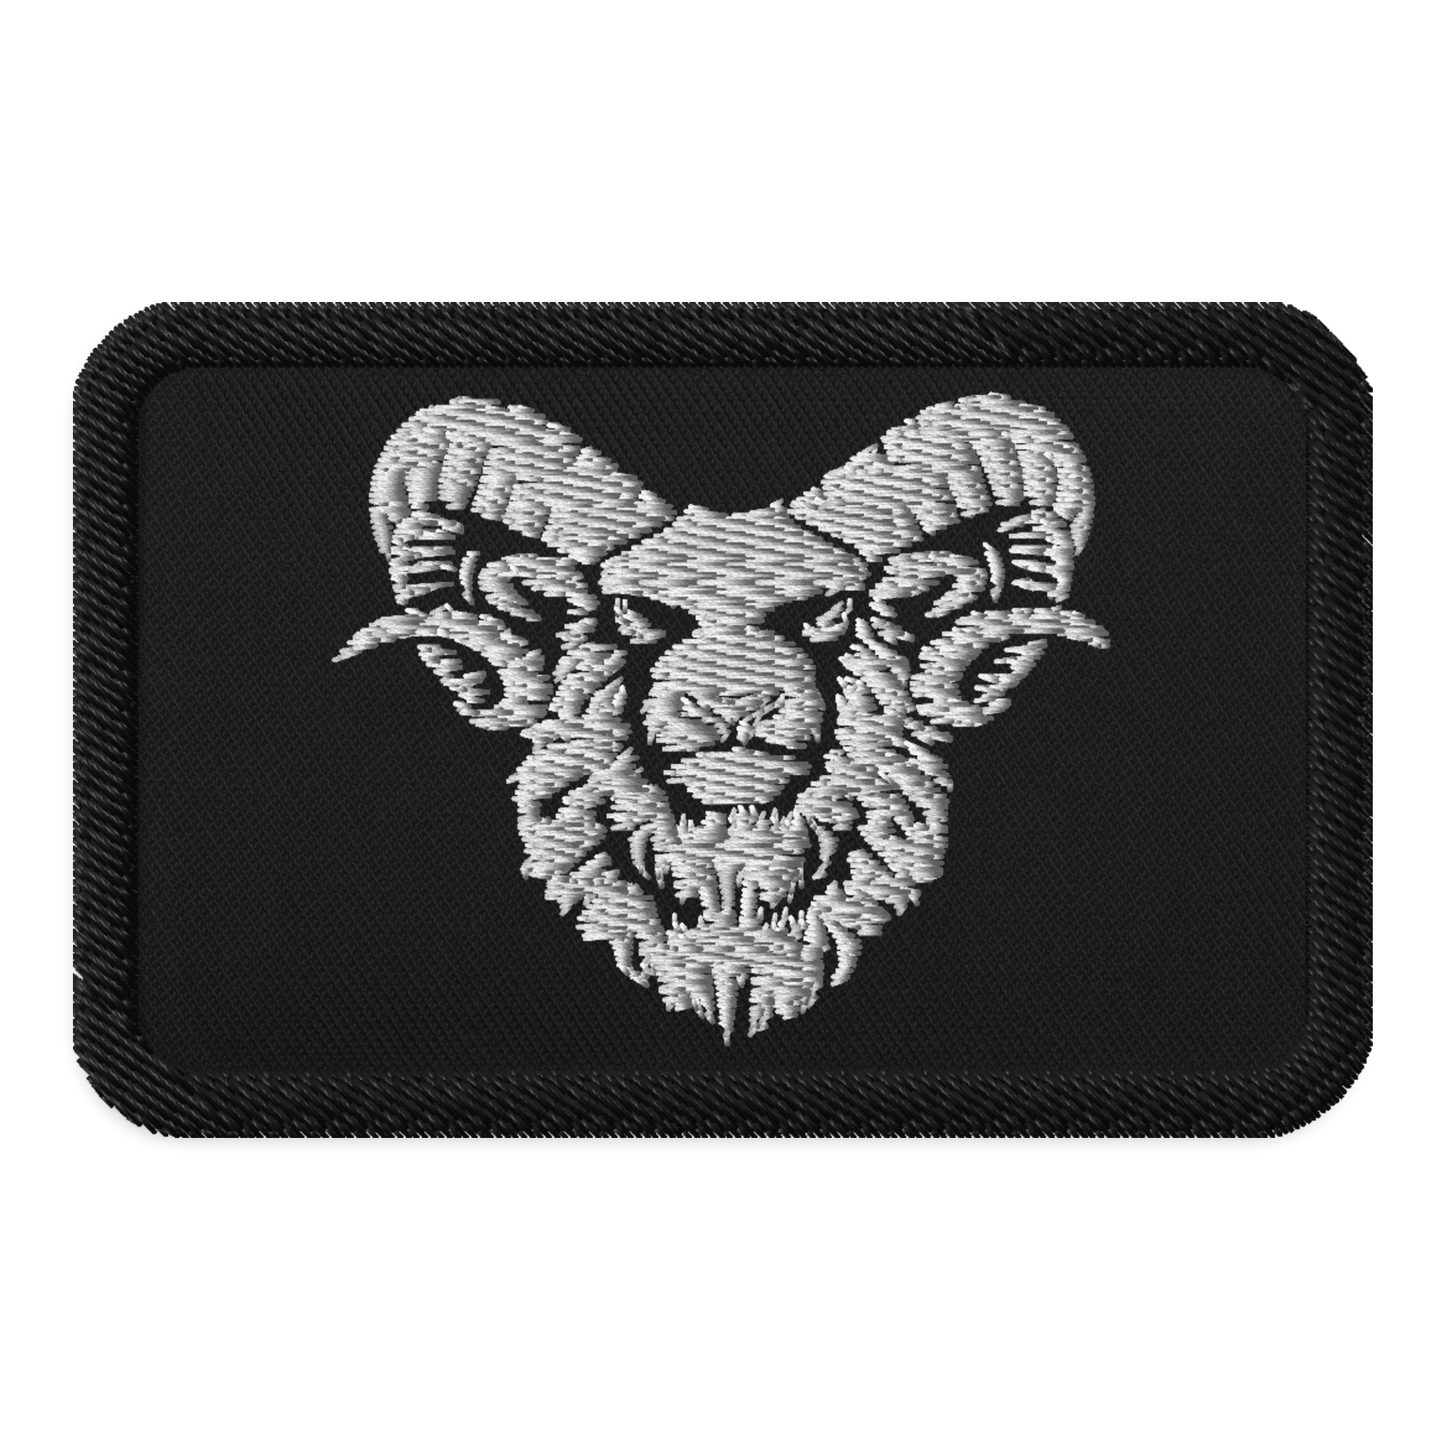 The Original Bearded Lamb Embroidered patches